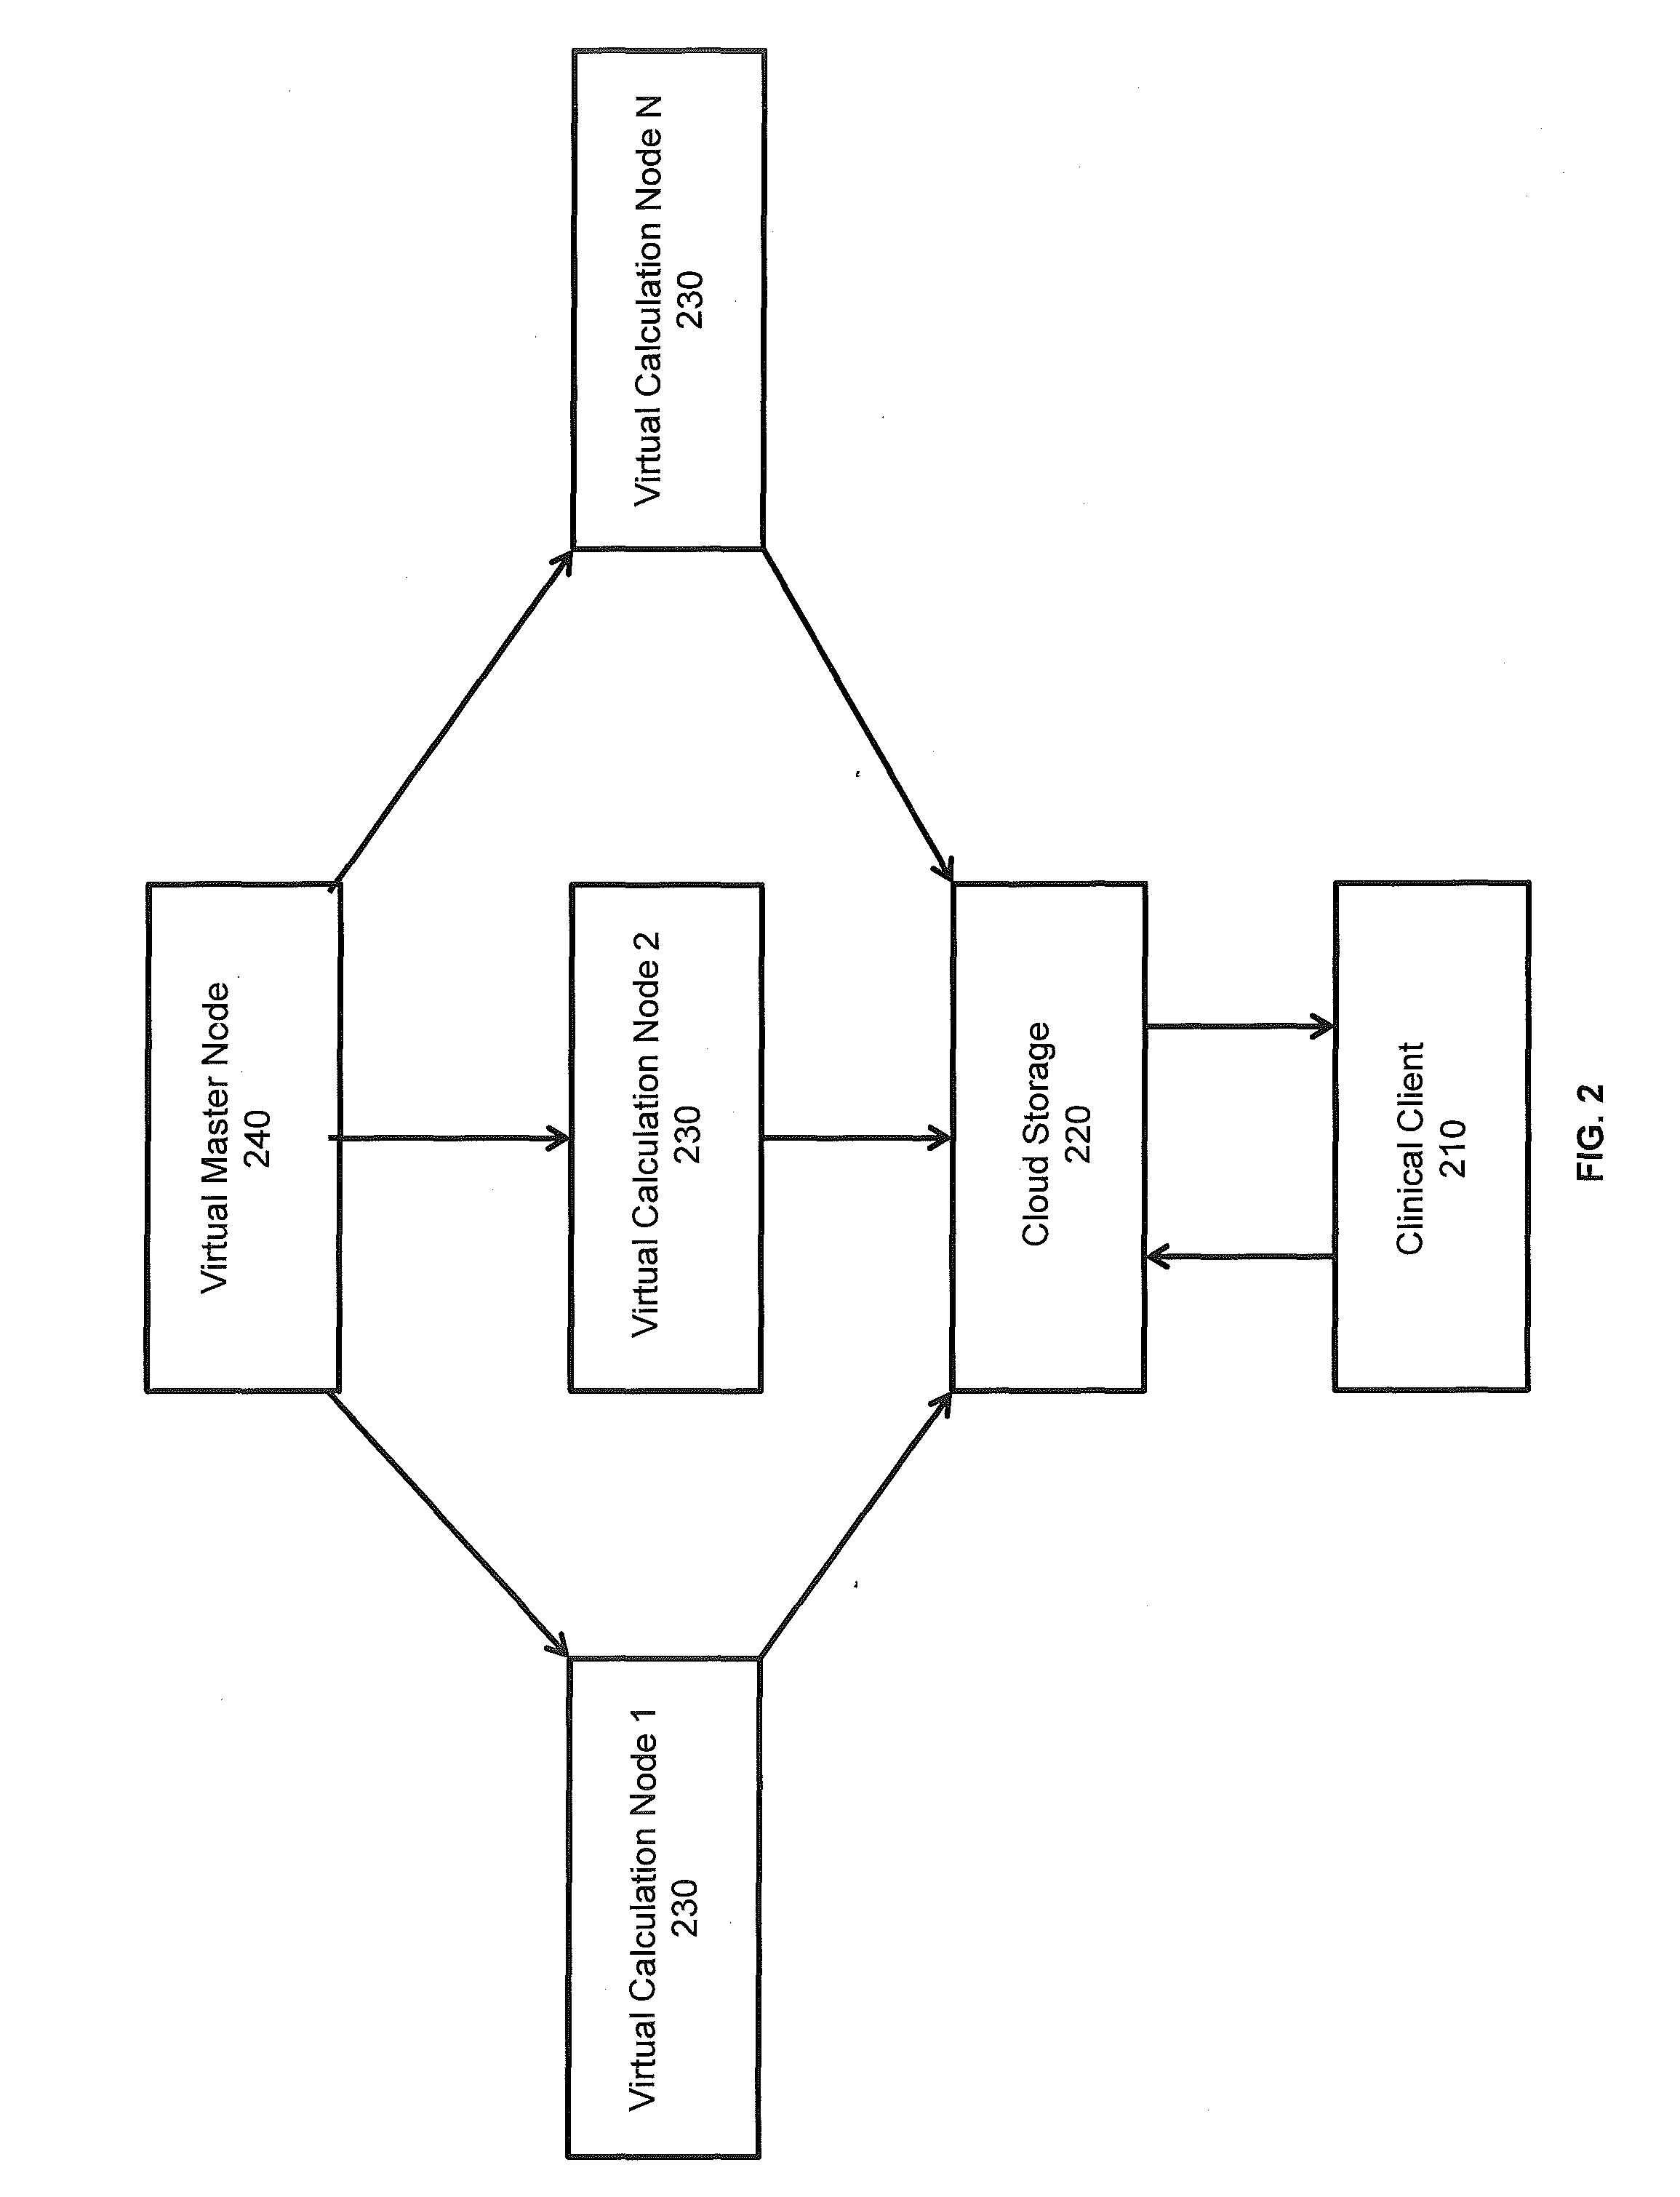 System and methods for performing medical physics calculation